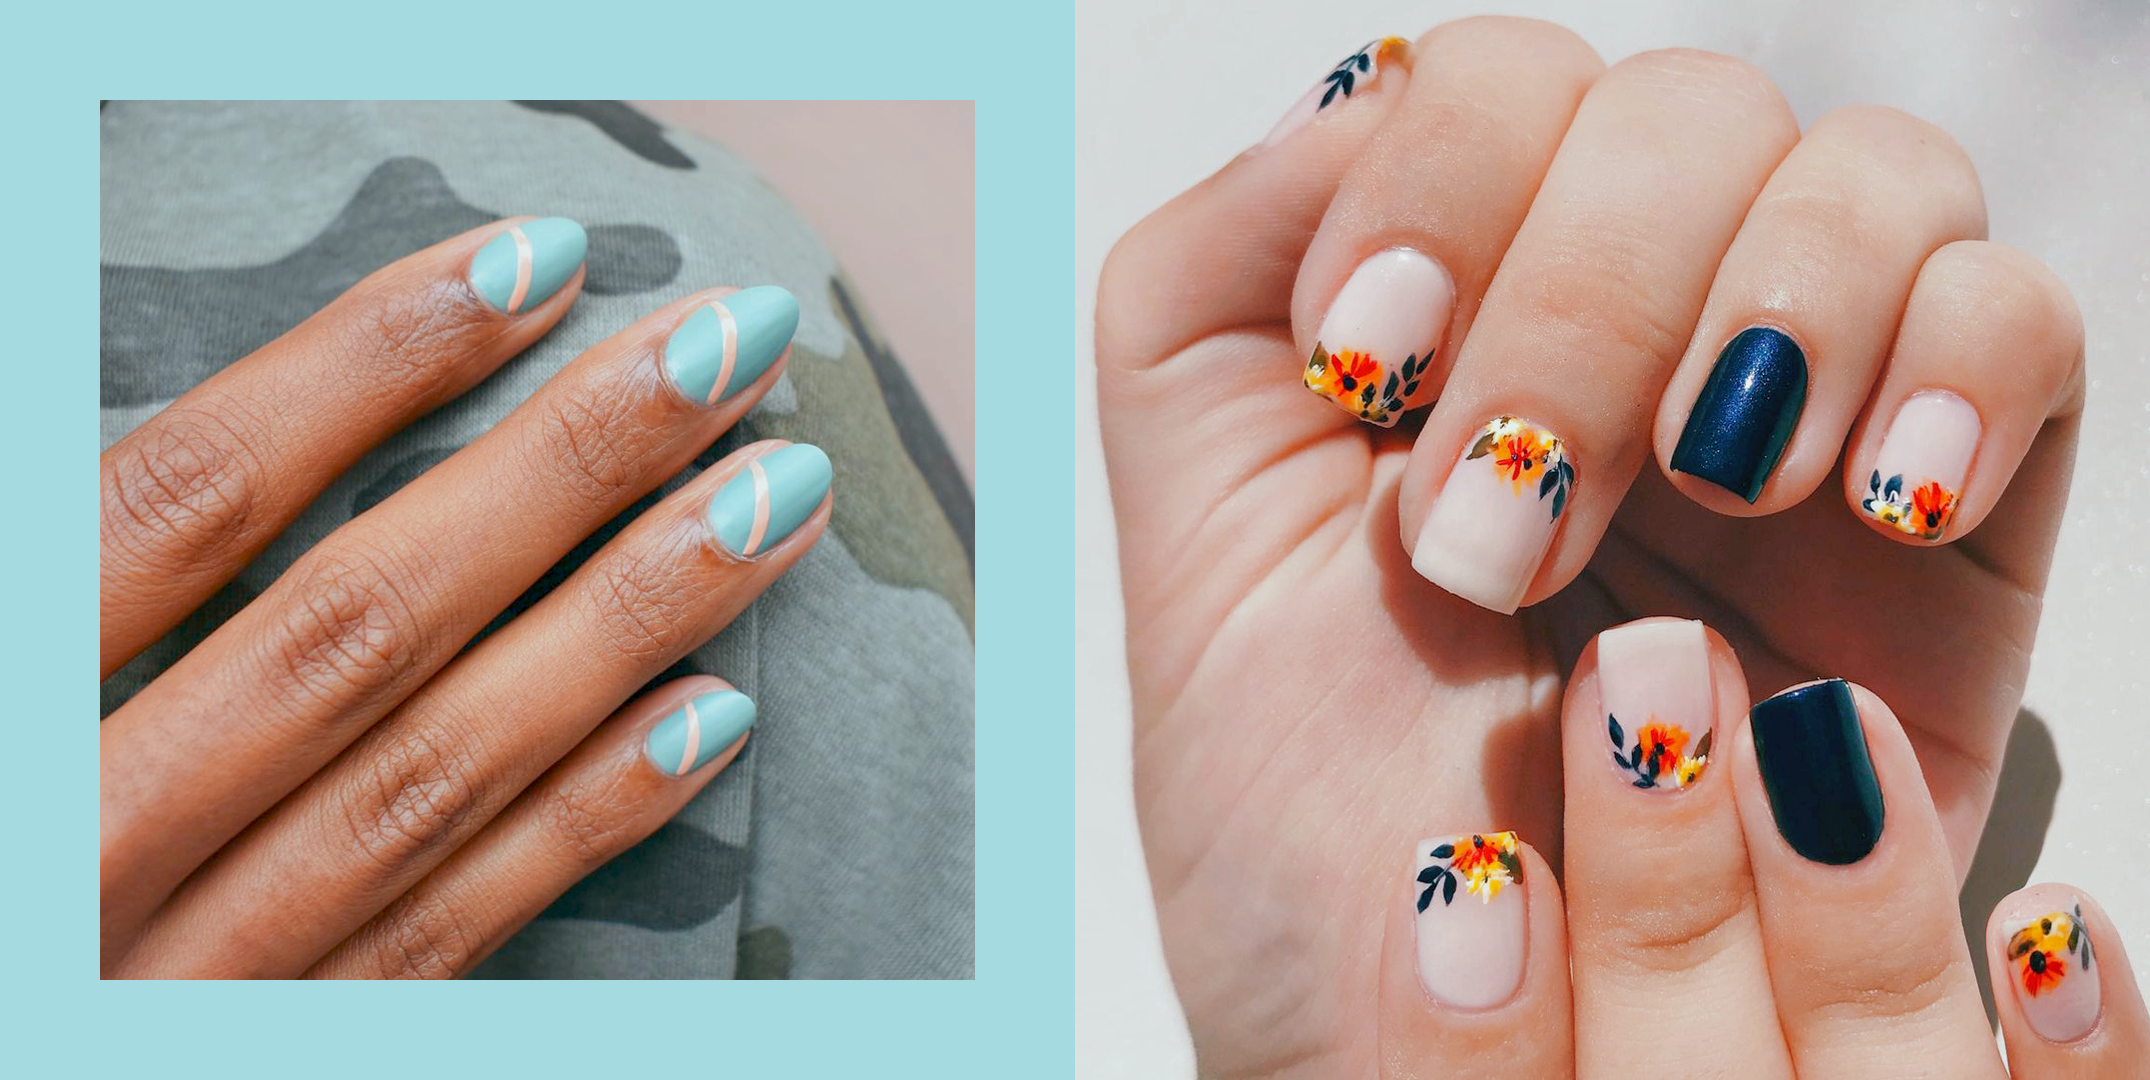 65 Cute Stiletto Nail Designs To Try in 2023